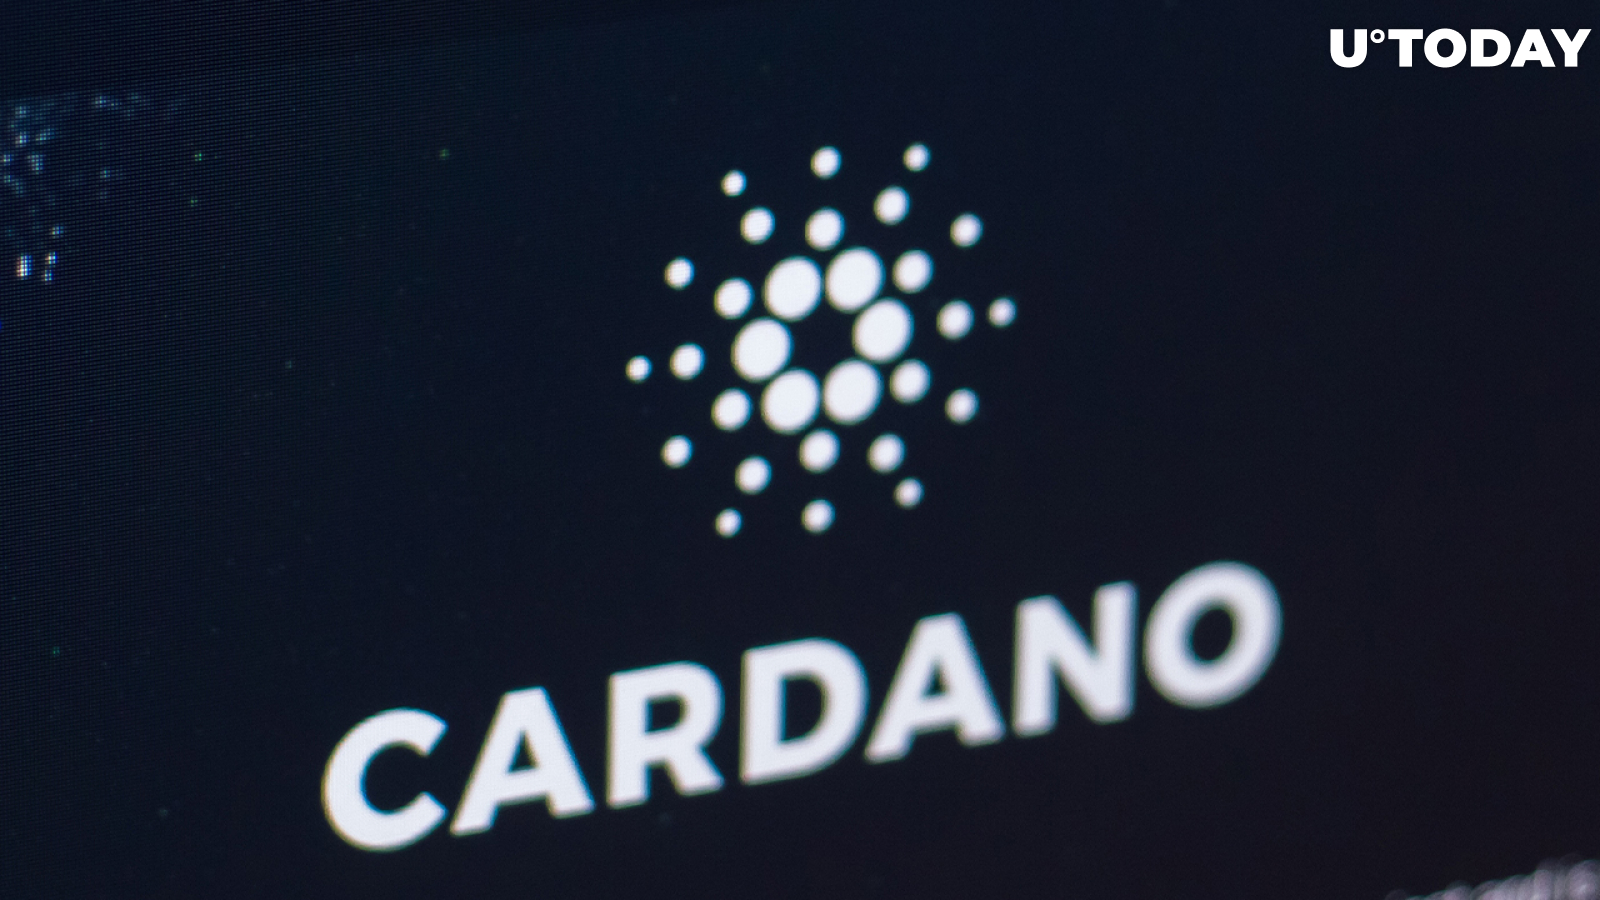 Cardano Founder: "It's Not Too Late to Come to Cardano" in Response to Vitalik Buterin's Thoughts on Ethereum